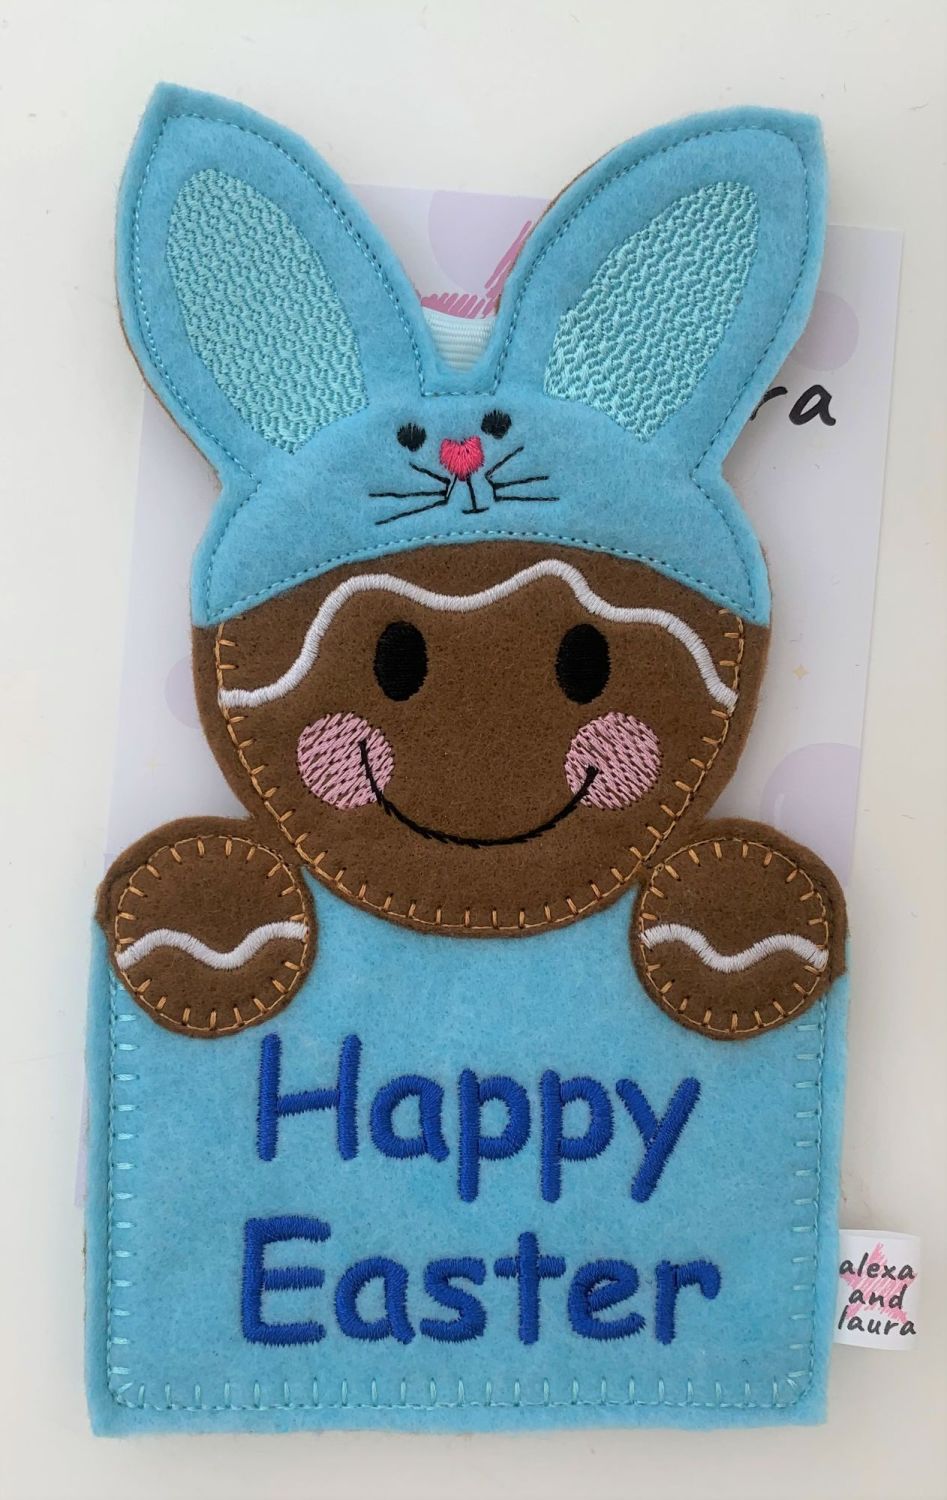 Bunny Easter Gift Pocket in Baby Blue